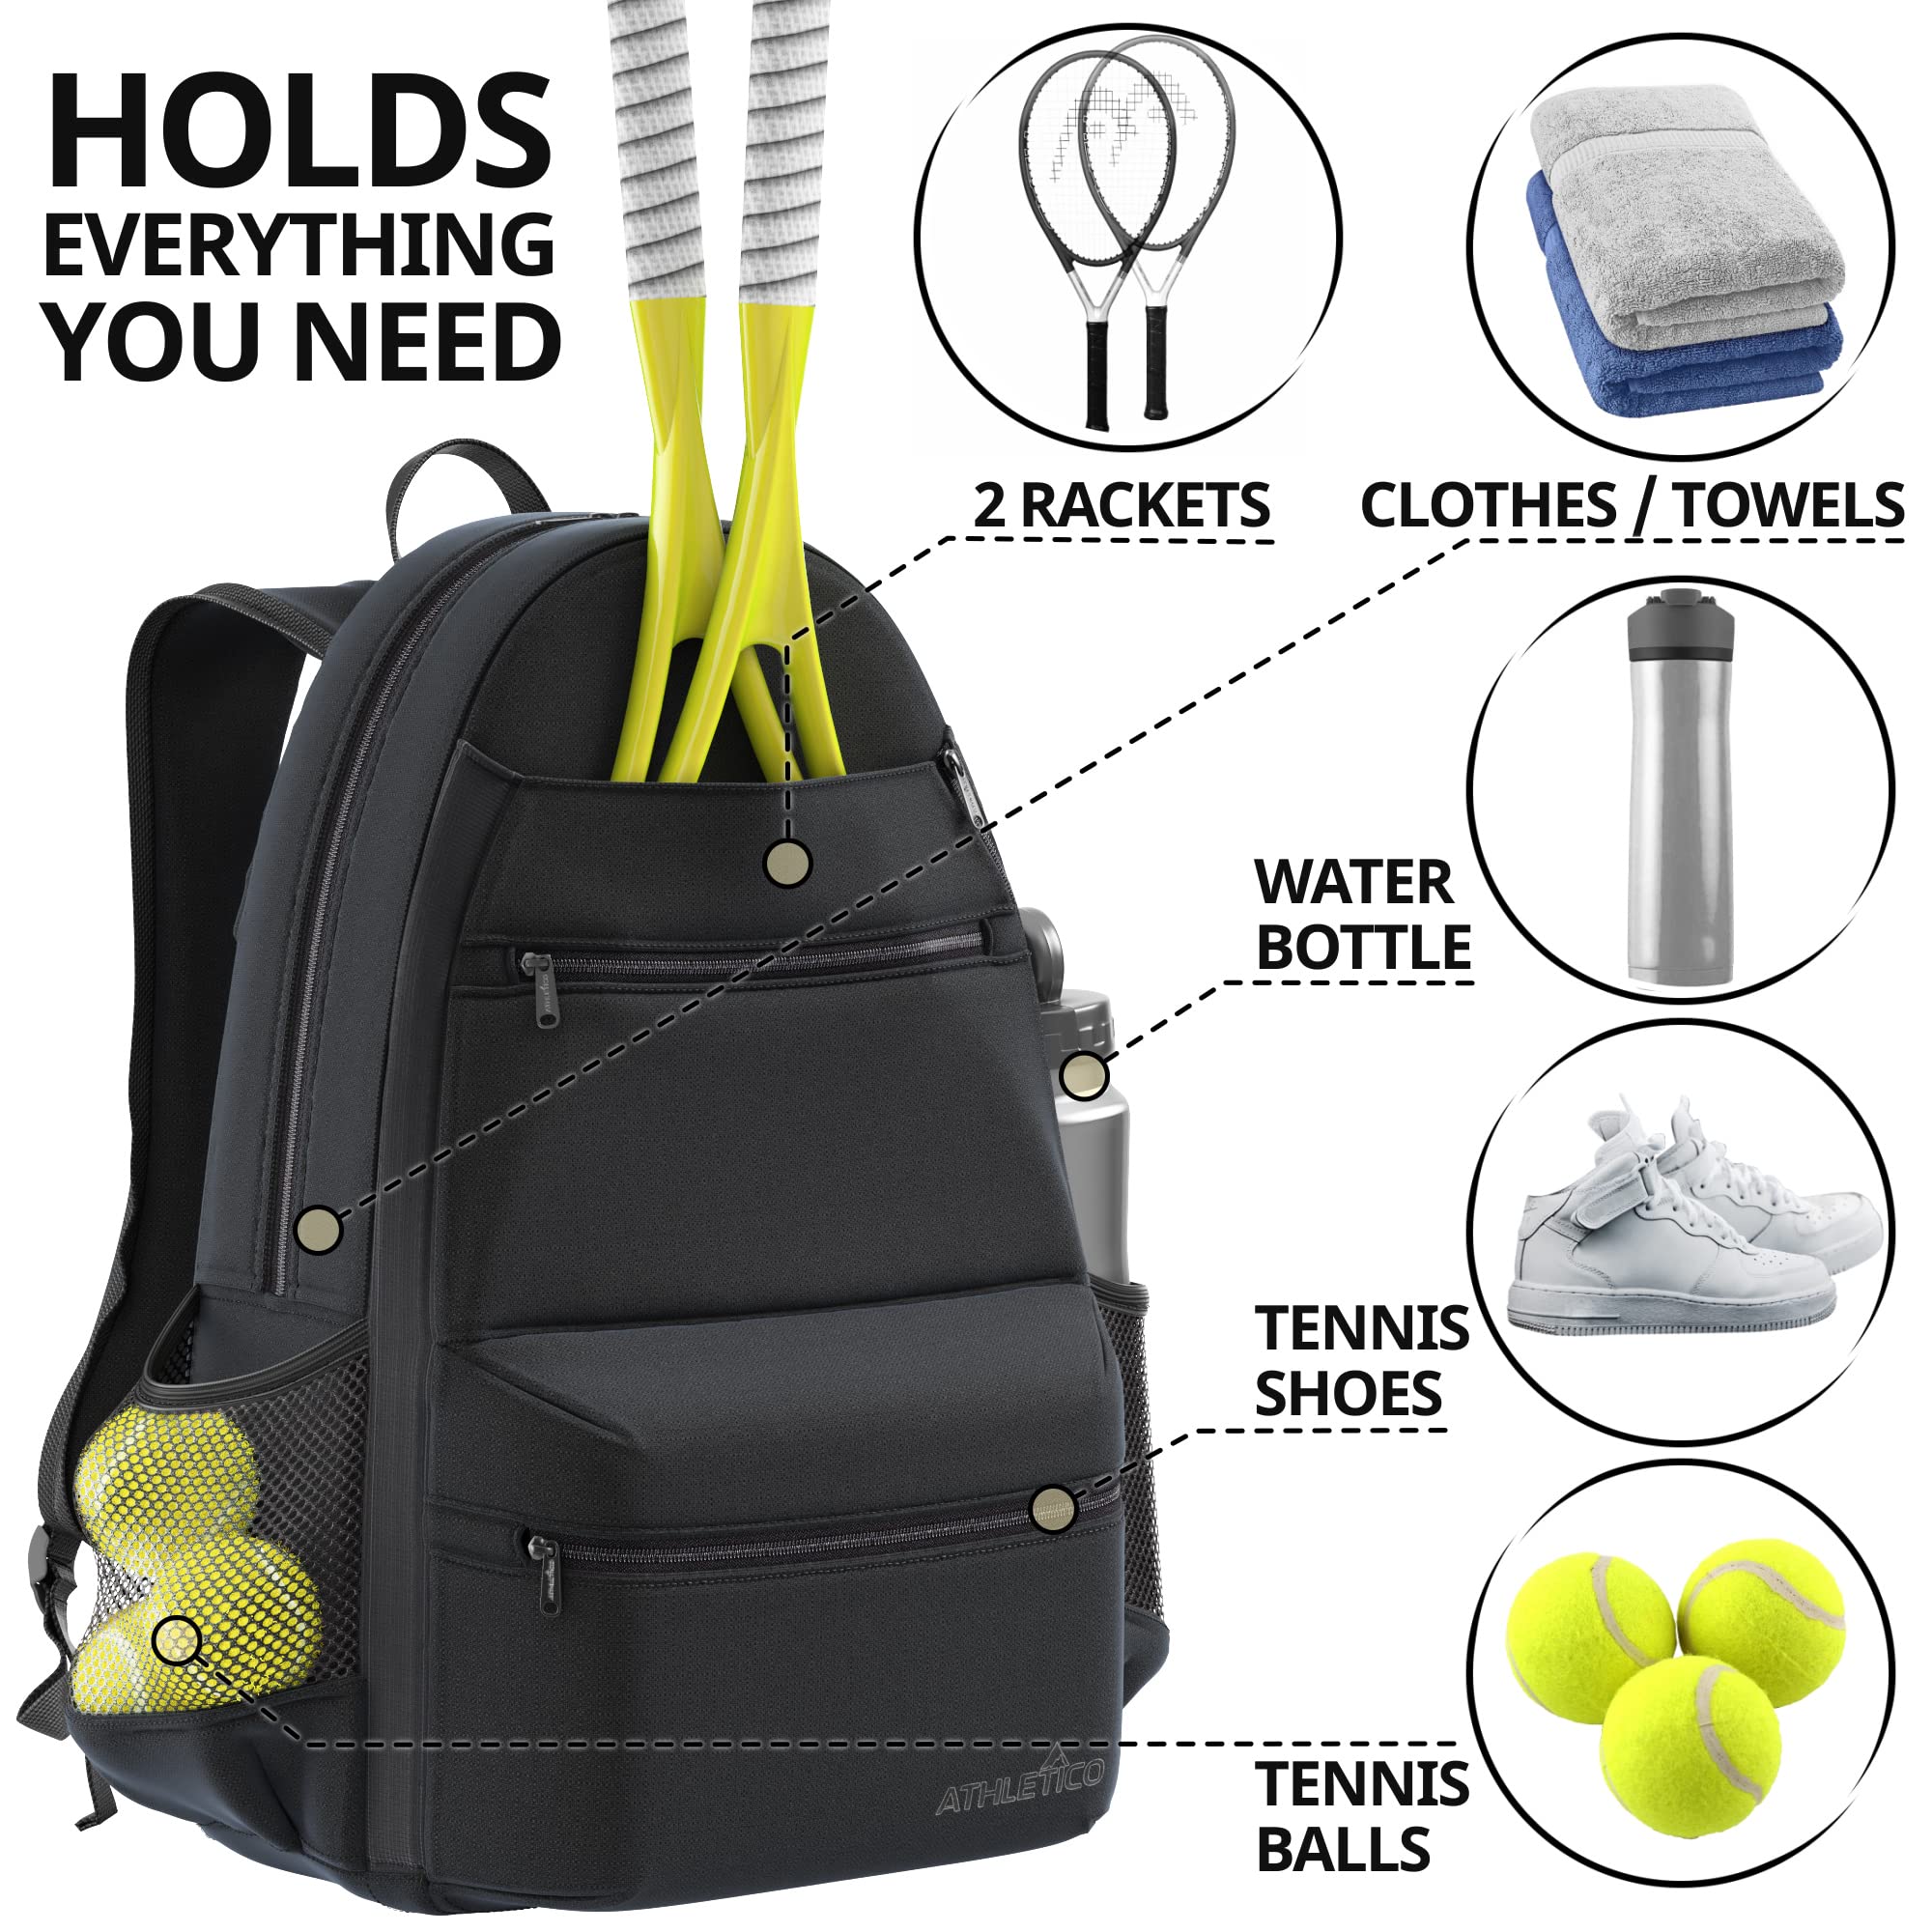 Athletico City Tennis Bag - Tennis Backpack for Men & Women Holds 2 Tennis Rackets and Shoes - Tennis Bags With Racquet Holder For Tennis, Pickleball, Squash & Badminton - Tennis Bags for Women  - Acceptable